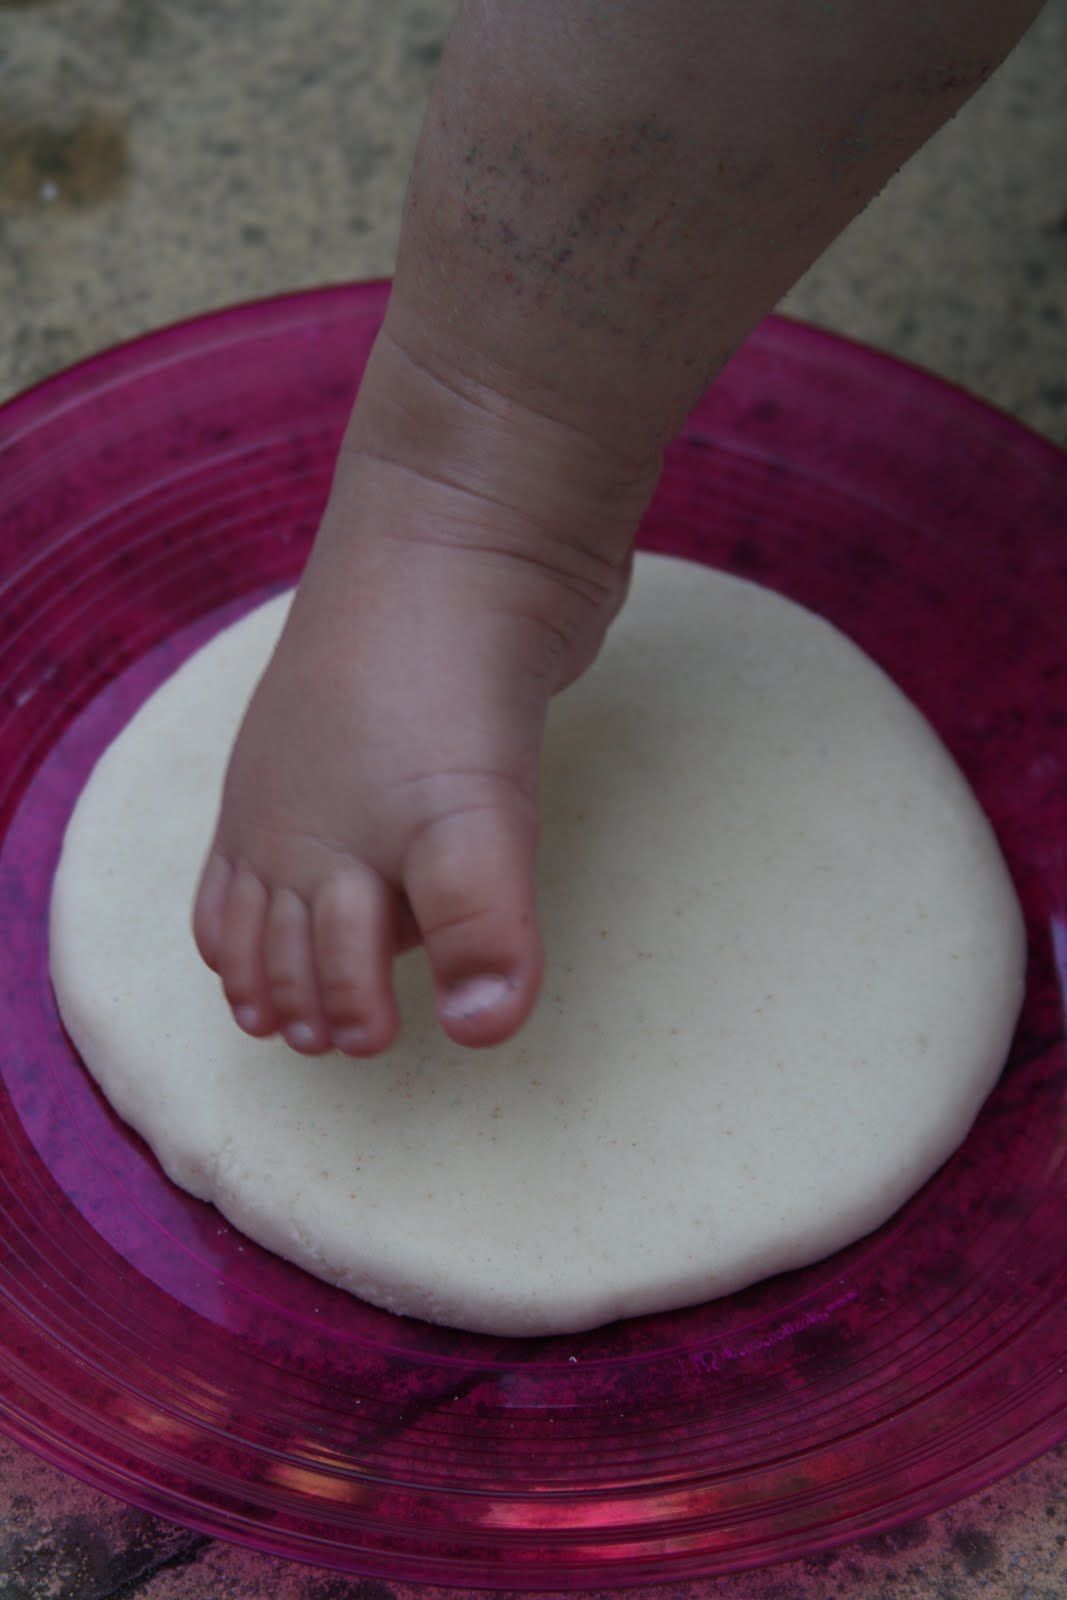 Salt Dough recipe – 1/2 cup salt, 1/2 cup flour, 1/4 cup water. Knead until dough forms. Make impression. Bake at 200 for 3 hours